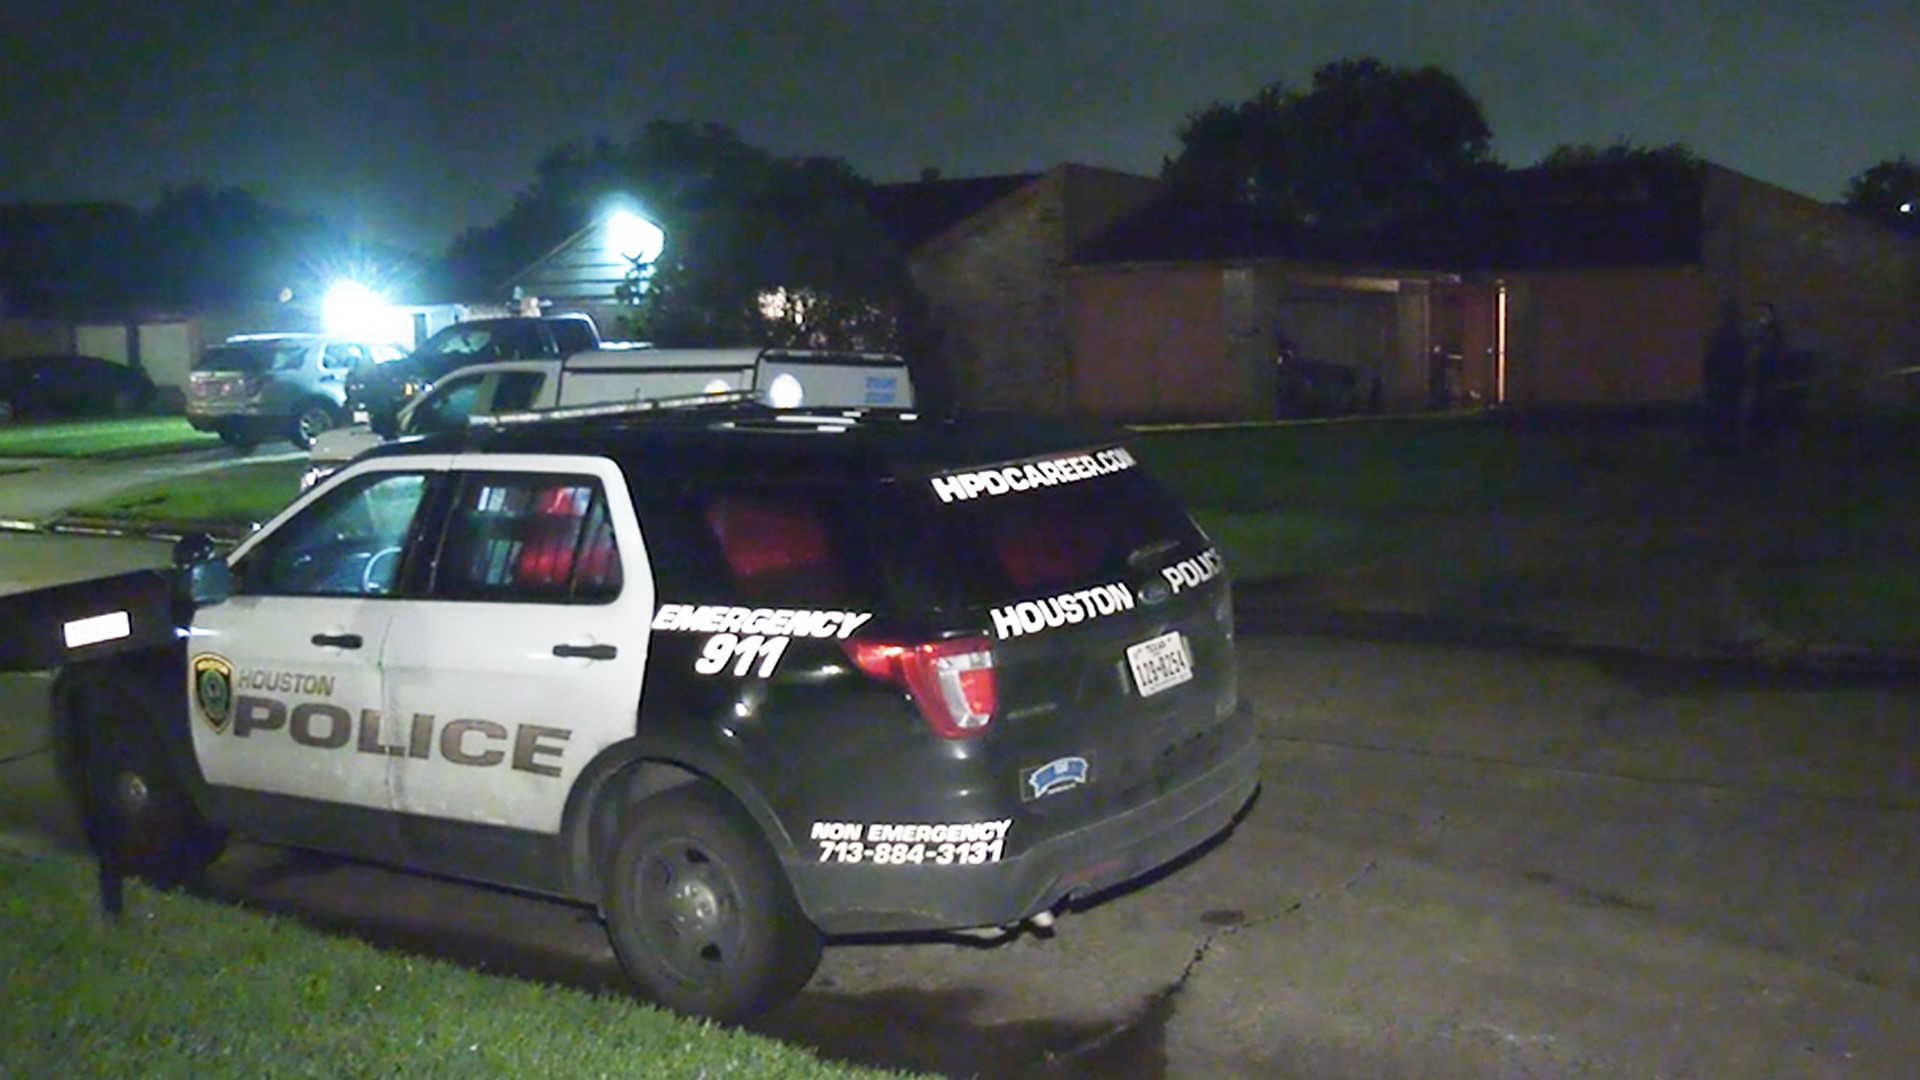 The body was found inside a home in the Missouri City area, Houston police say